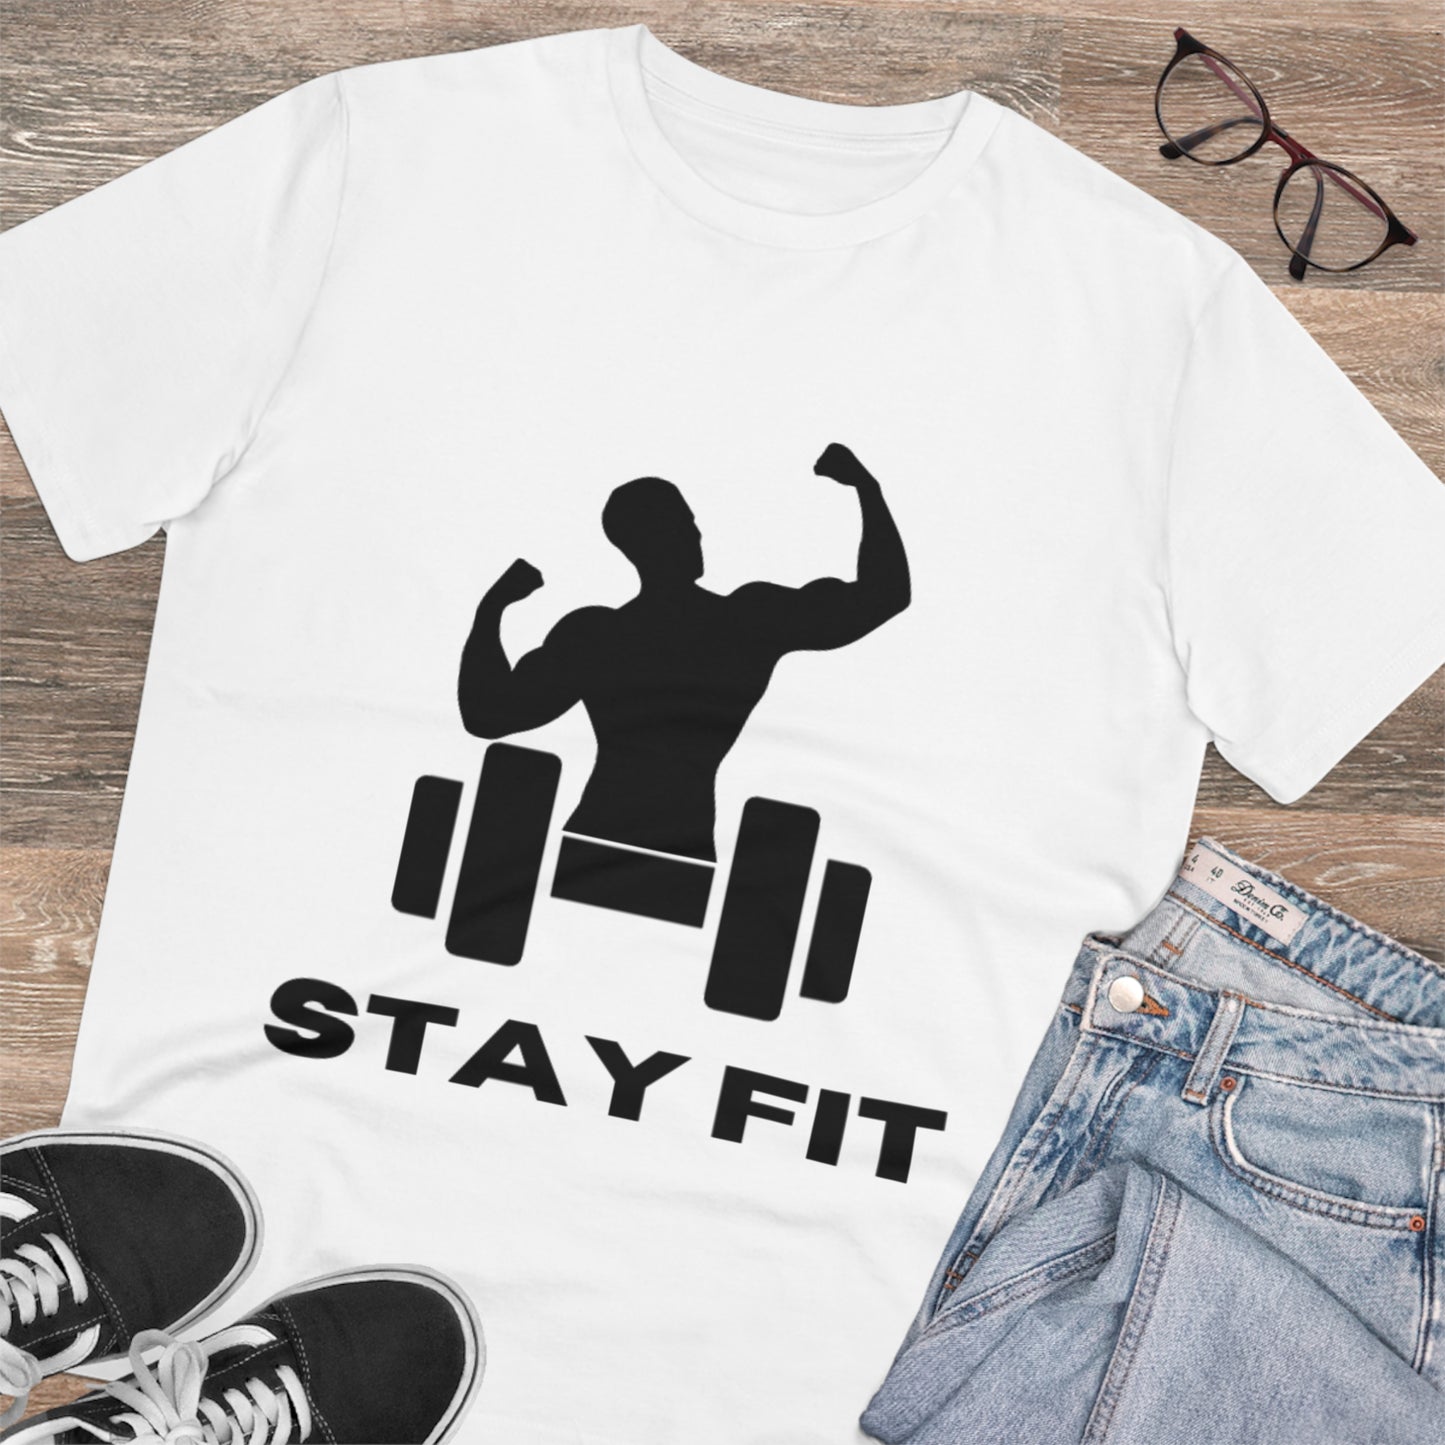 Muscle Up Motivation Shirt "STAY FIT" T-shirt - Unisex